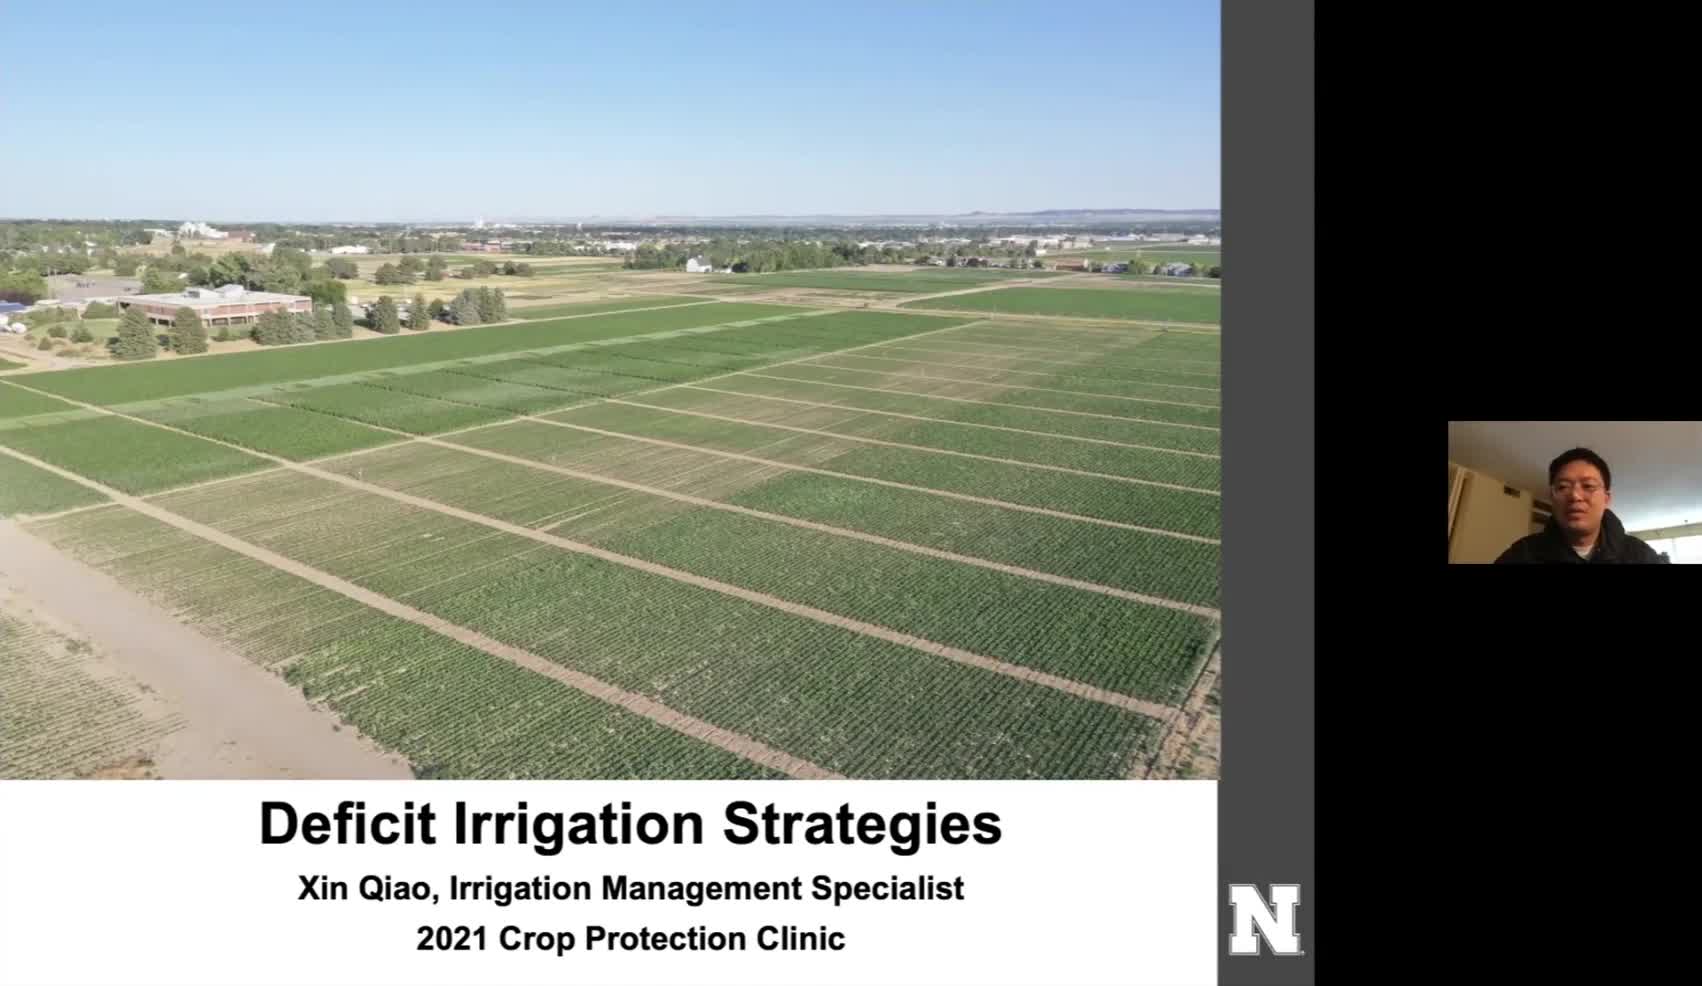 Deficit irrigation strategies for corn, sugar beets, and dry edible beans